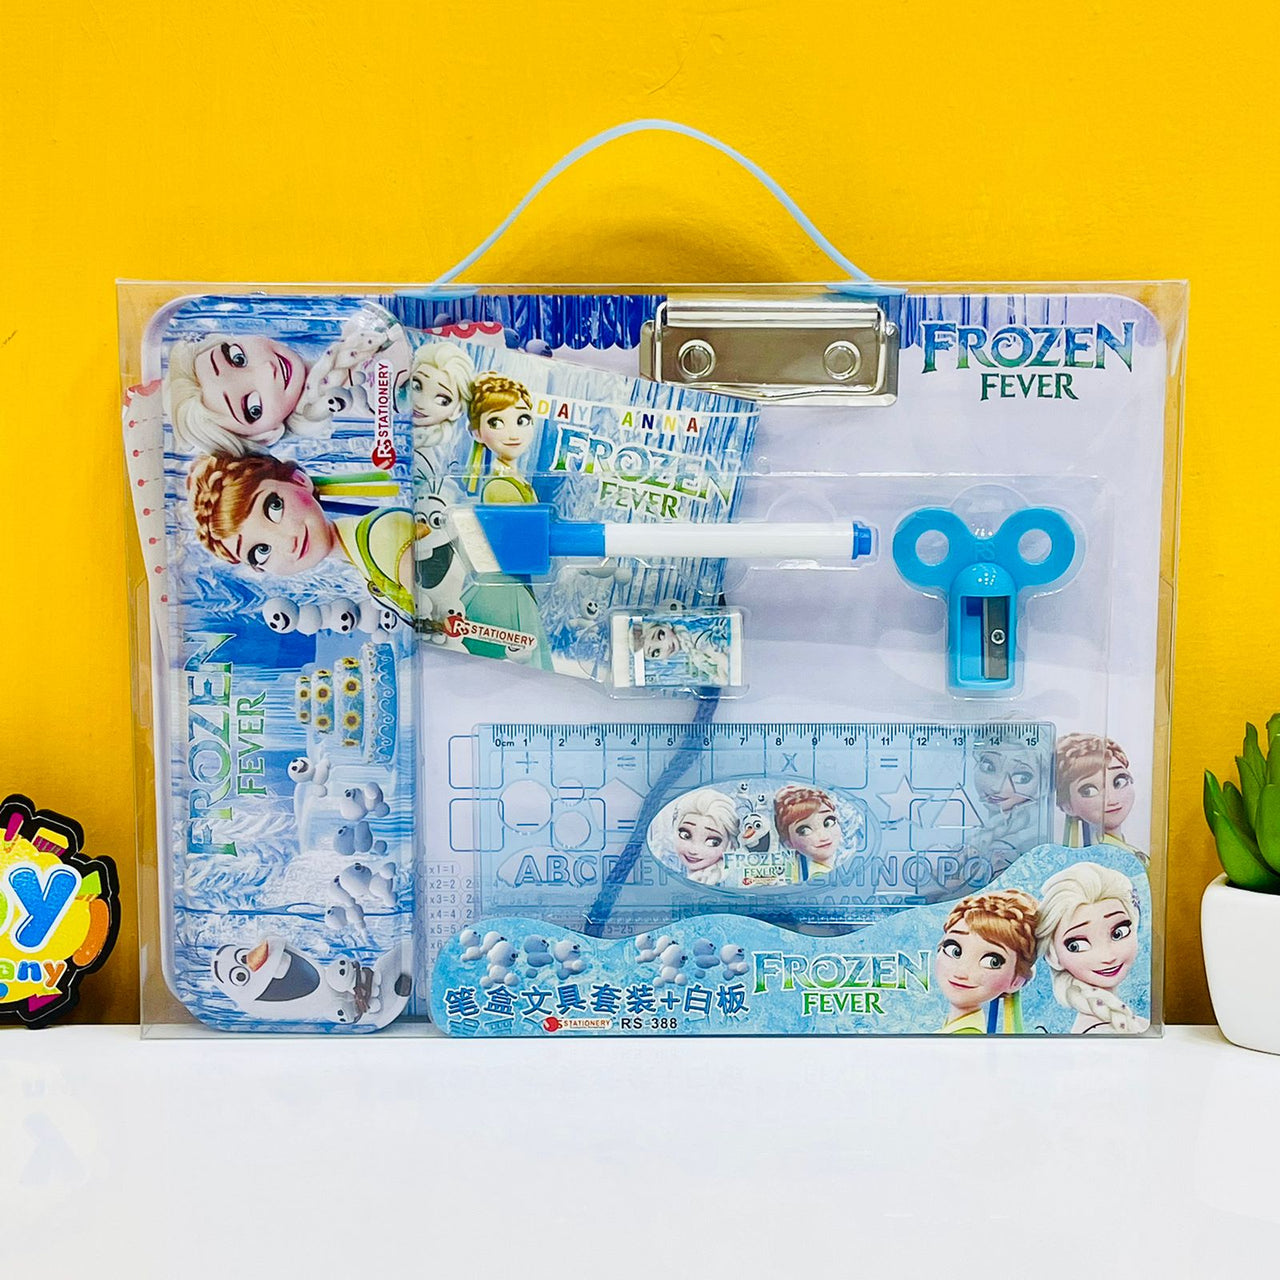 Frozen Gift Stationery Set with White Board